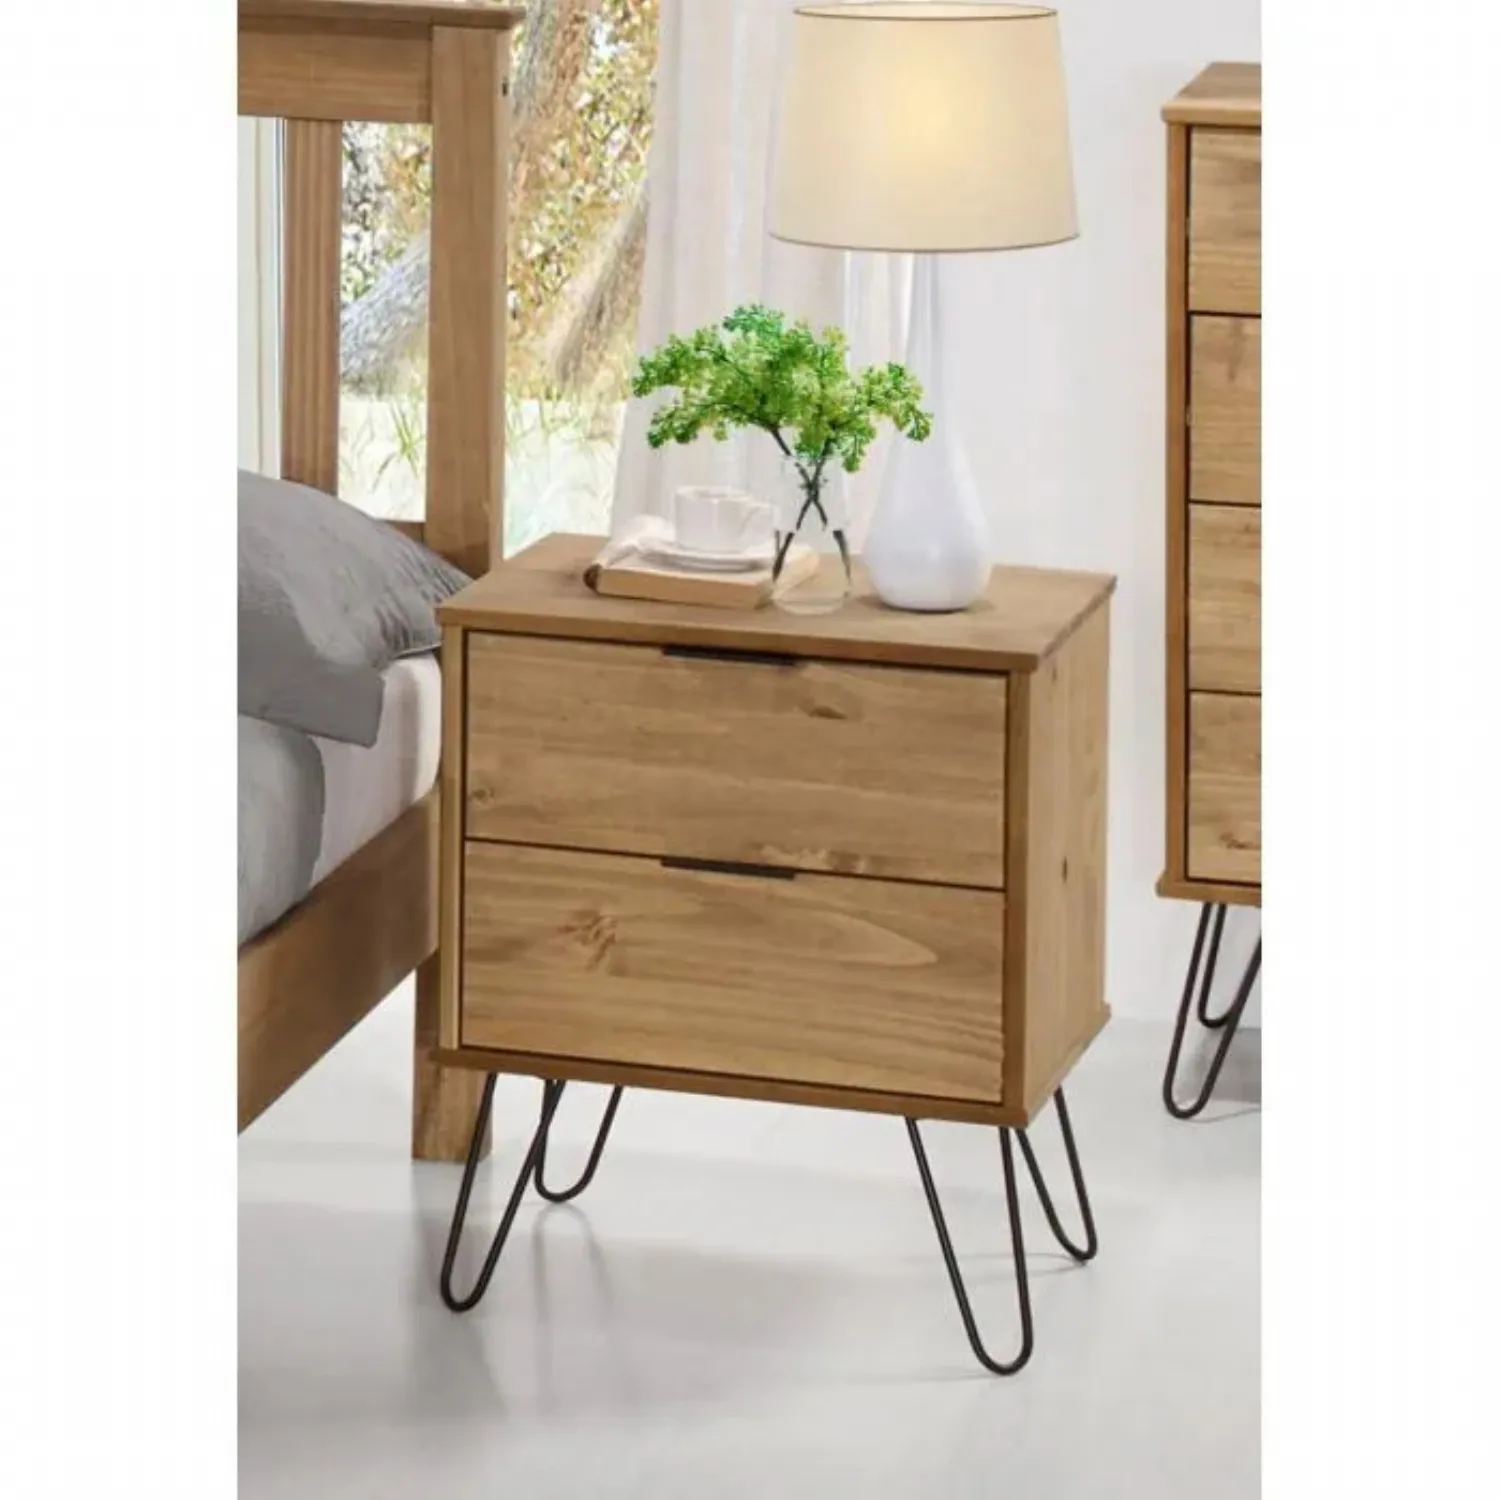 Pine 2 Drawer Bedside Chest Hairpin Metal Legs